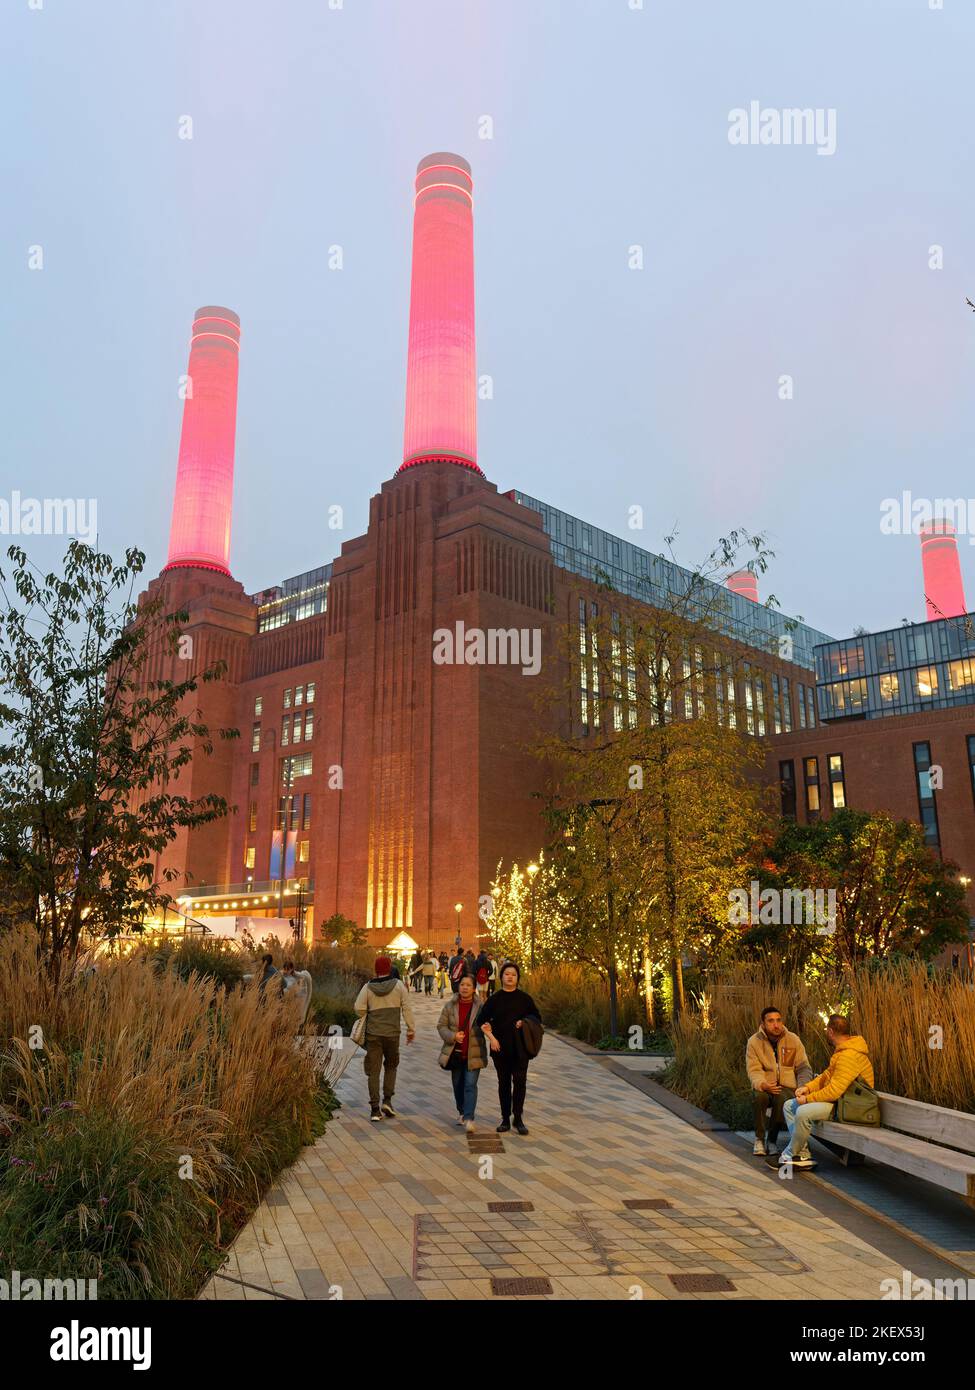 View looking up a path leading to Battersea Power Station in London illuminated at dusk with bright red chimneys piercing the sky Stock Photo